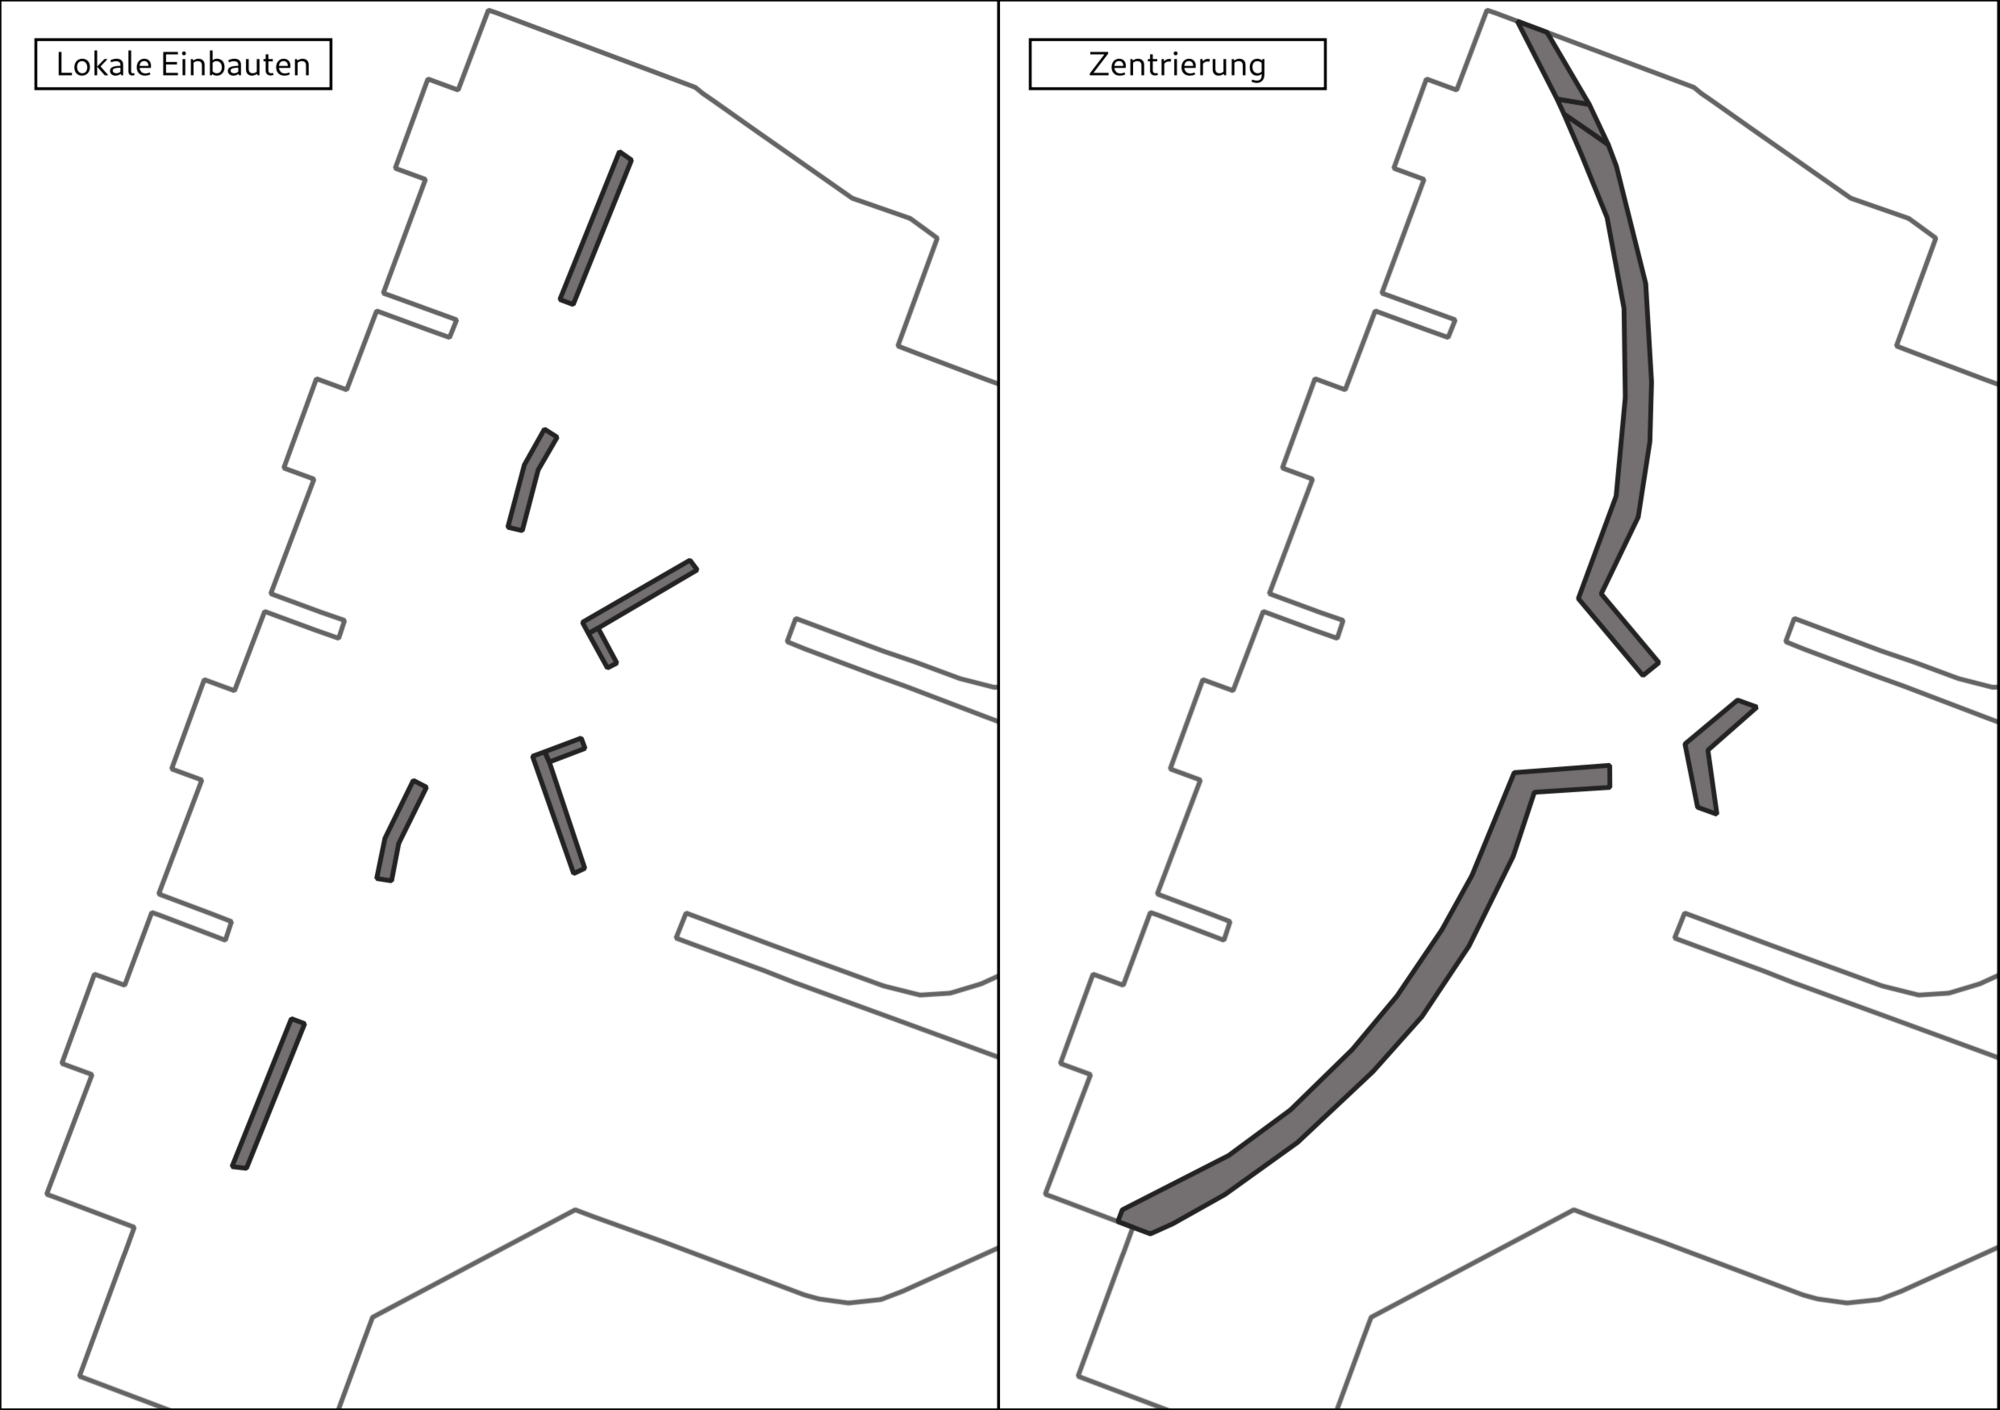 Installation variants for flow distribution: Left: concept with local installations, Right: concept with centering.